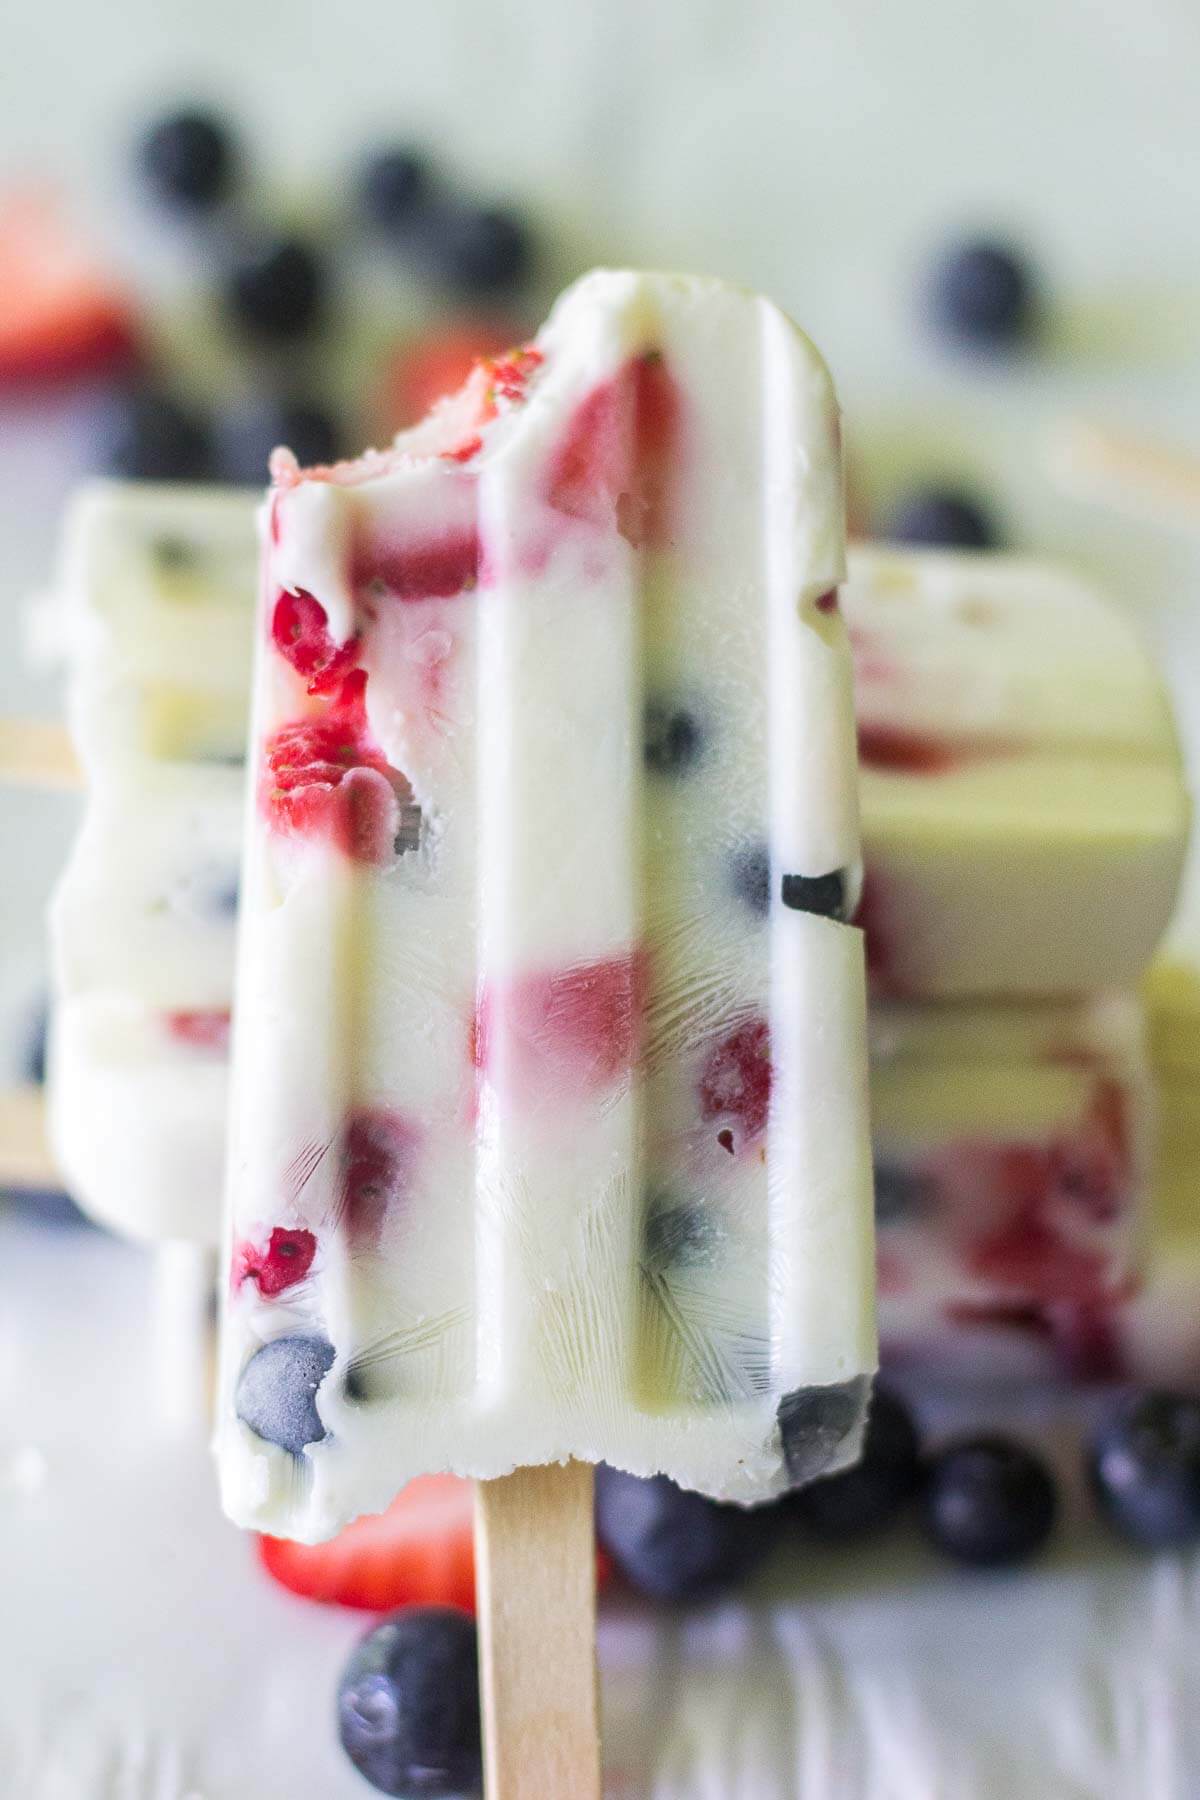 These red, white and blue yogurt popsicles are such a festive and healthy recipe to celebrate 4th of July! With only 3 ingredients, you can make this healthy pops in minutes.